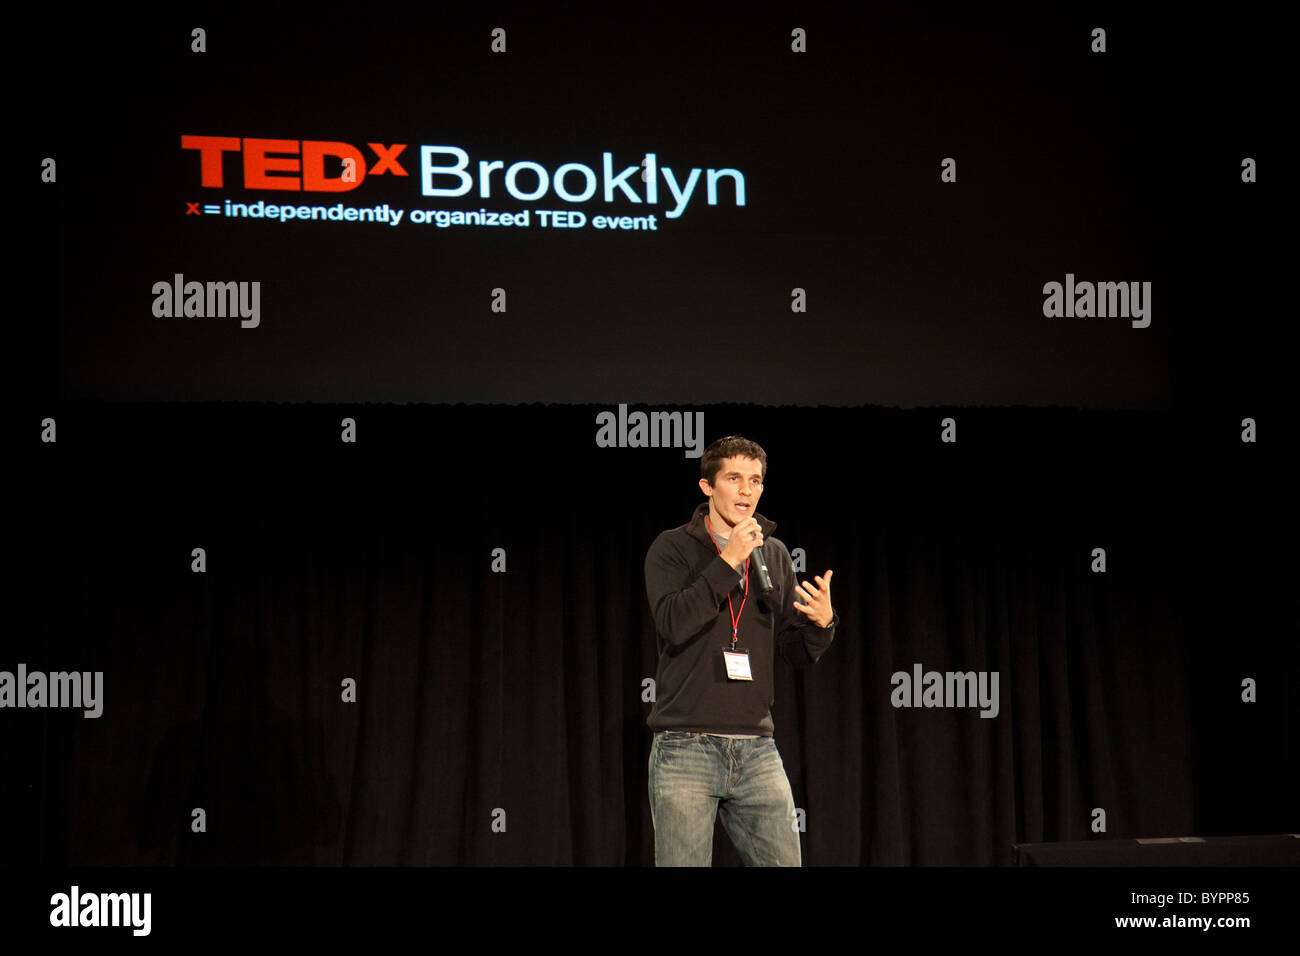 TED X Brooklyn Event Nate Ball speaking NYC Stock Photo